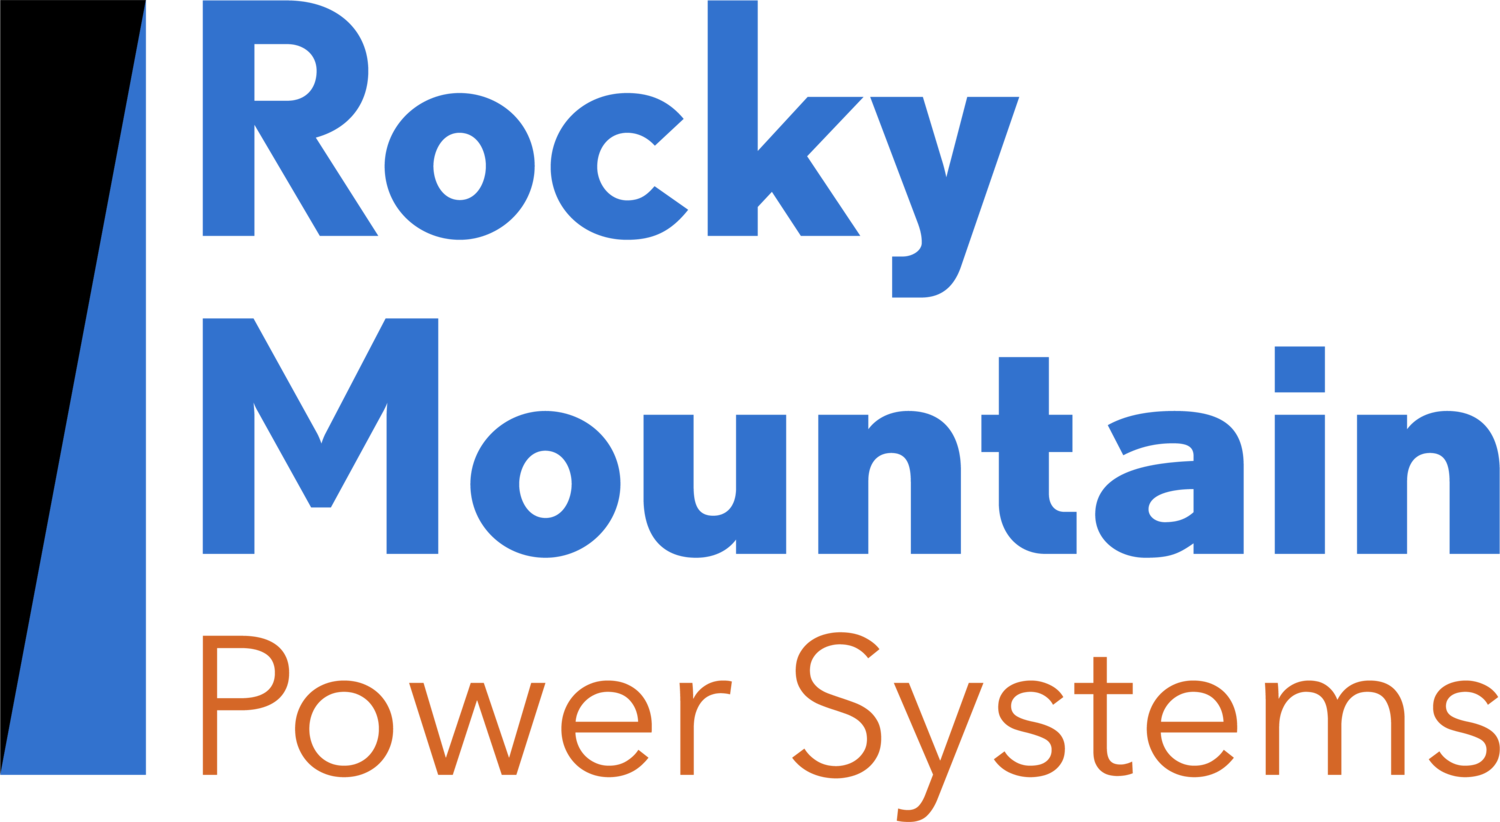 Rocky Mountain Power Systems